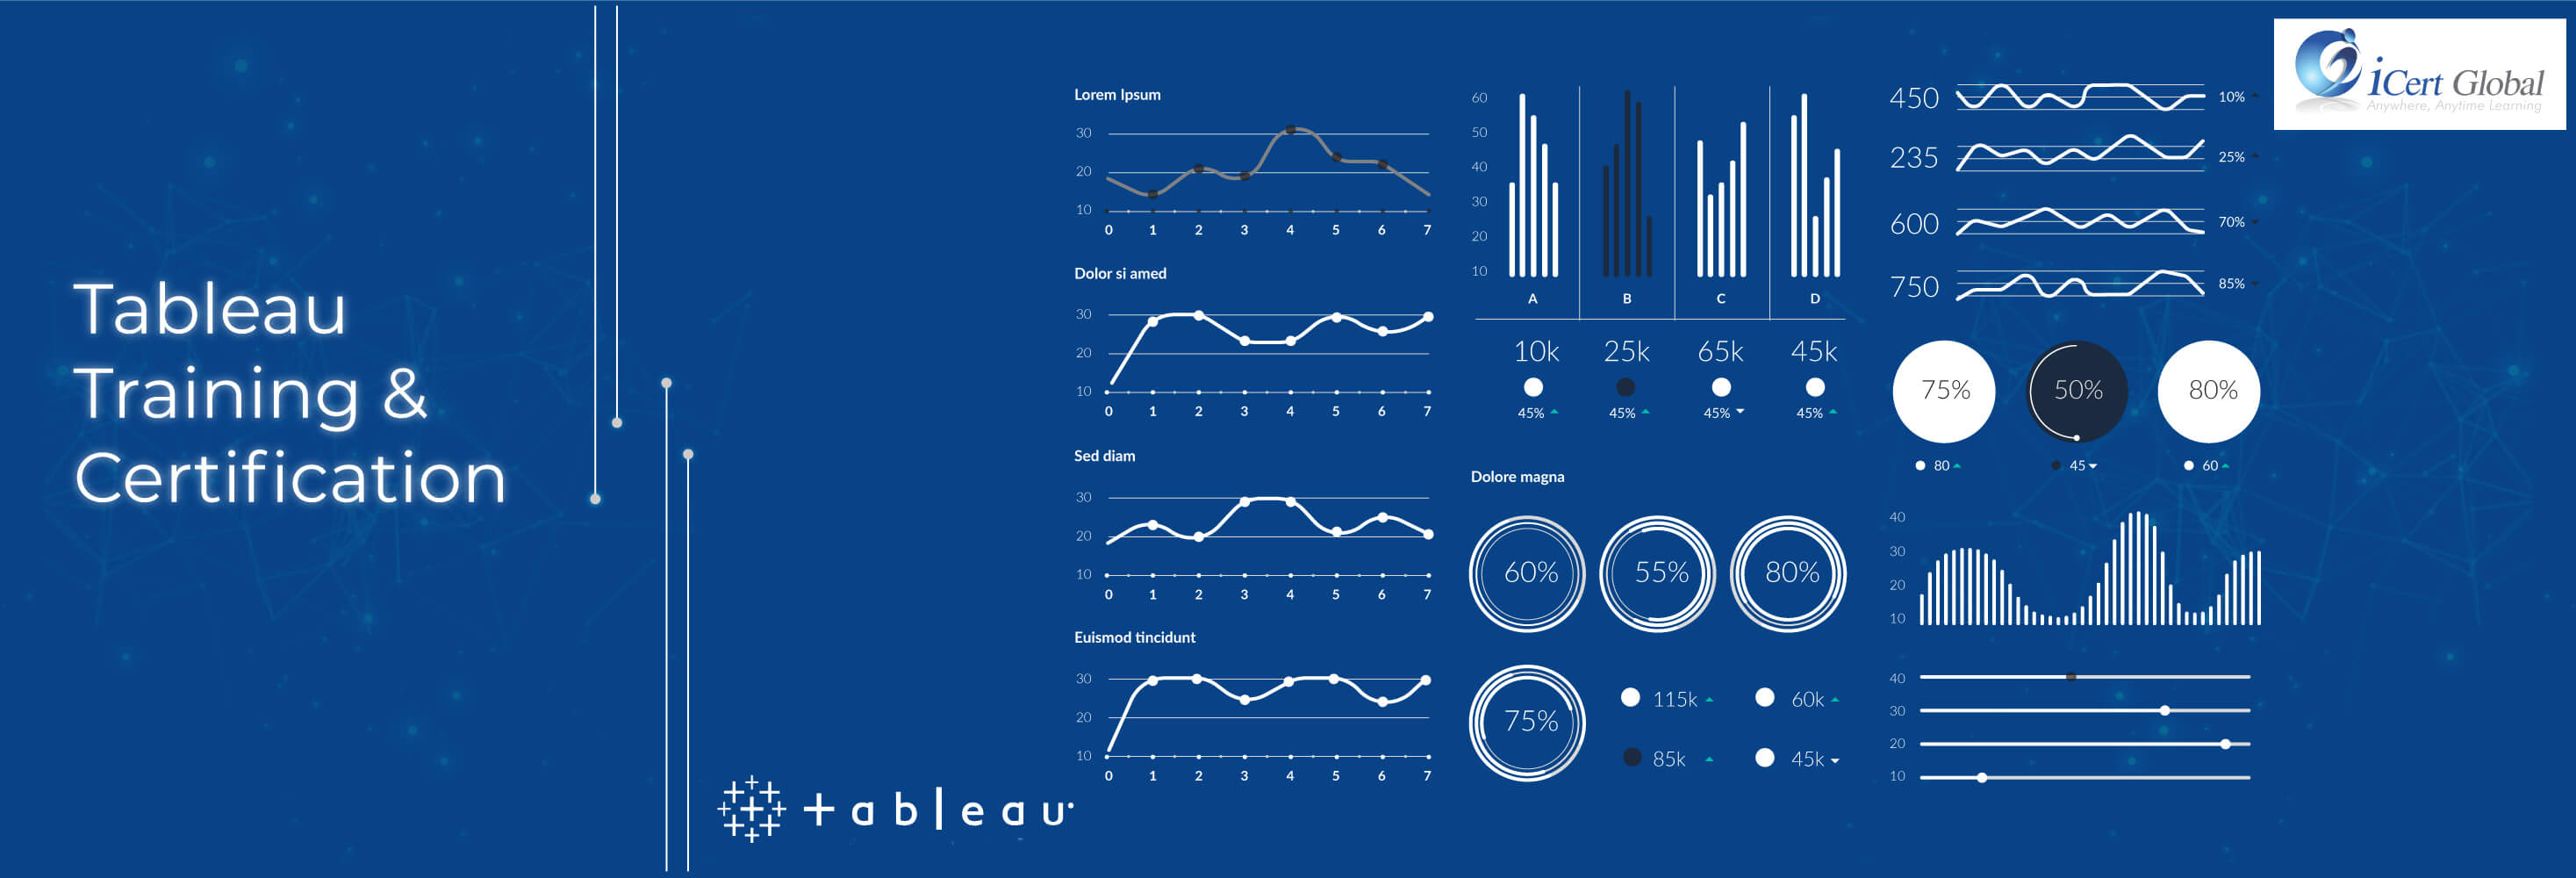 Tableau training and certification